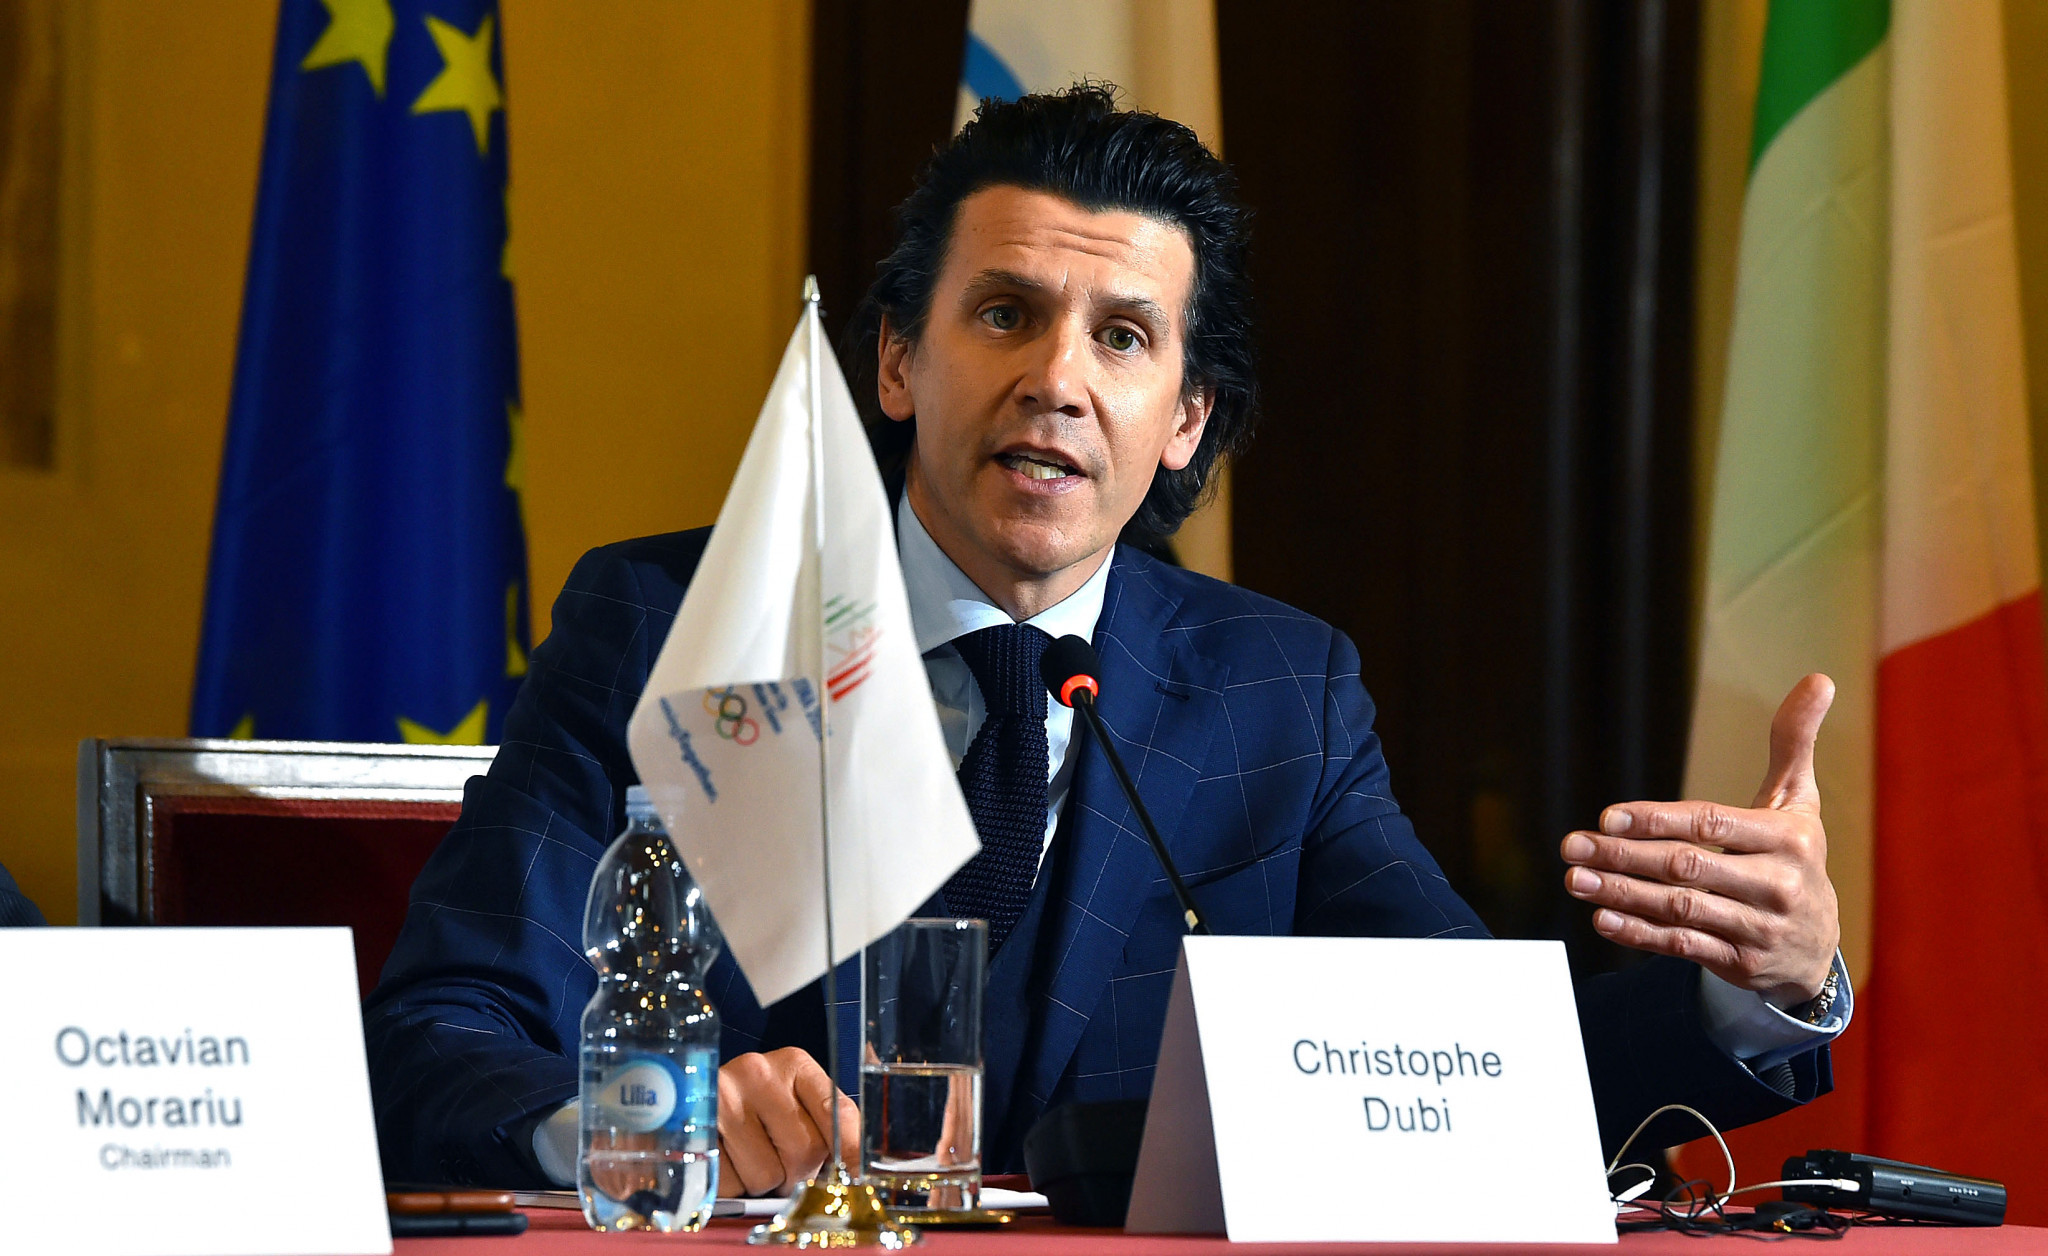 IOC executive director of the Olympic Games Christophe Dubi reveals some of the lessons they have learned during their visit to Italy ©CONI